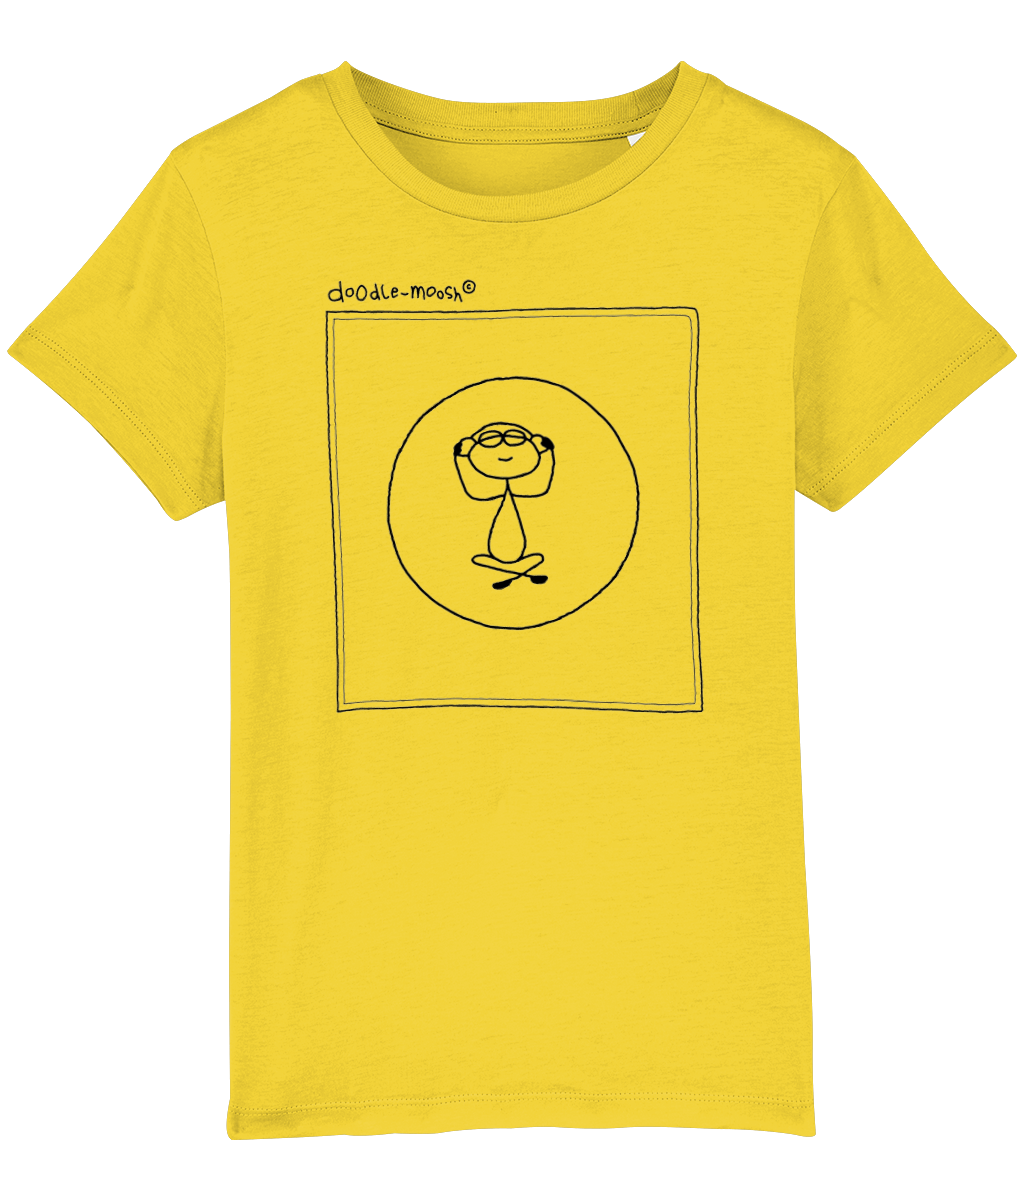 tuned in t-shirt, yellow with black